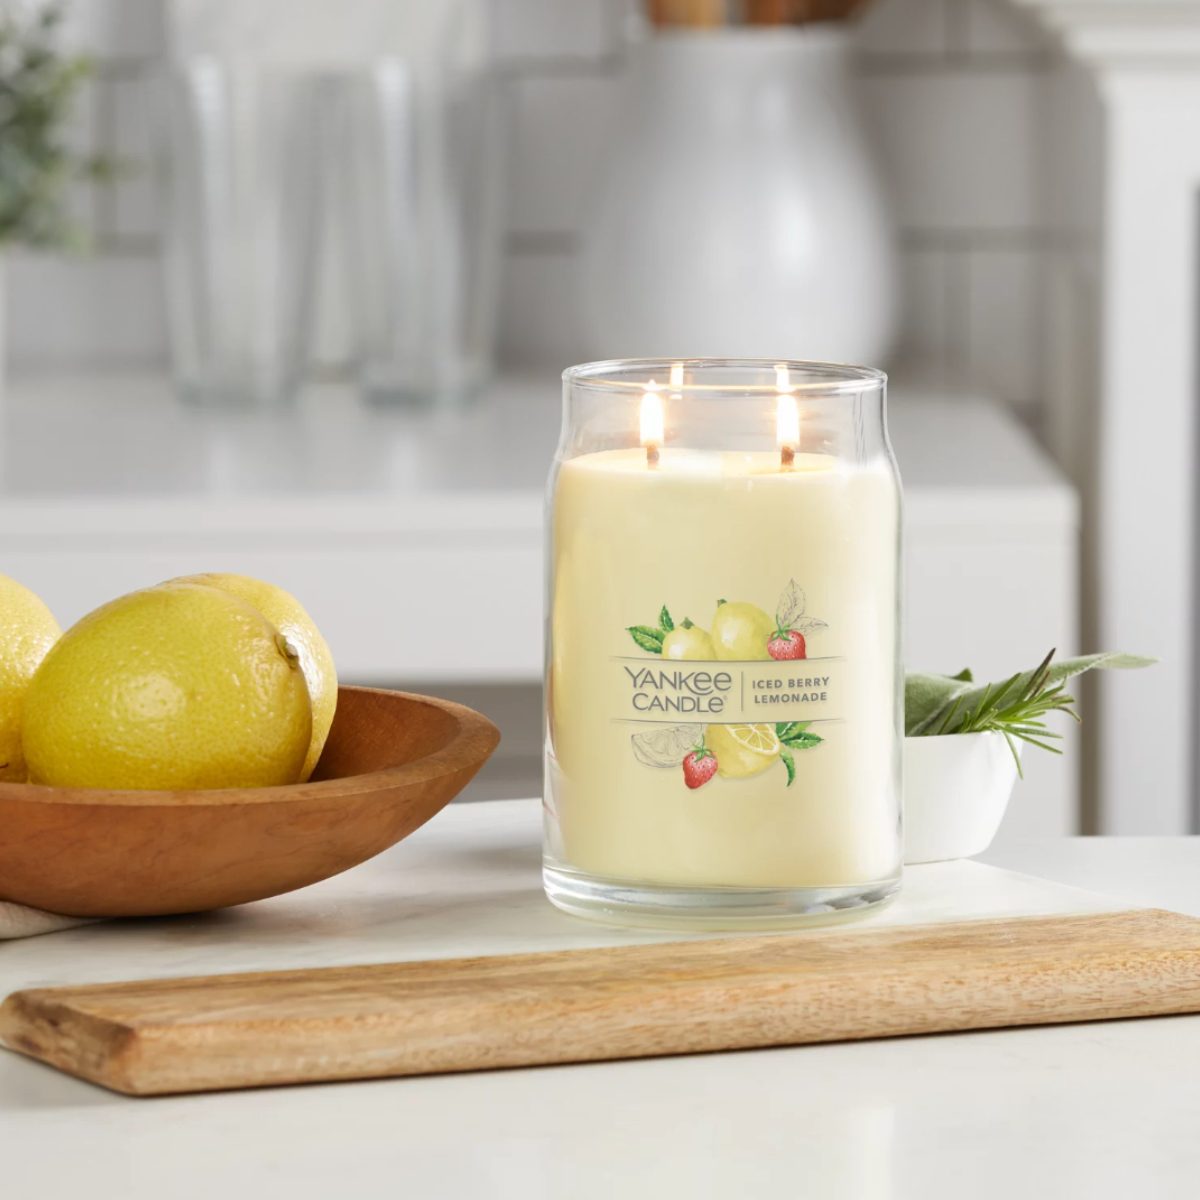 Candle Iced Berry Lemonade Yankee Candle